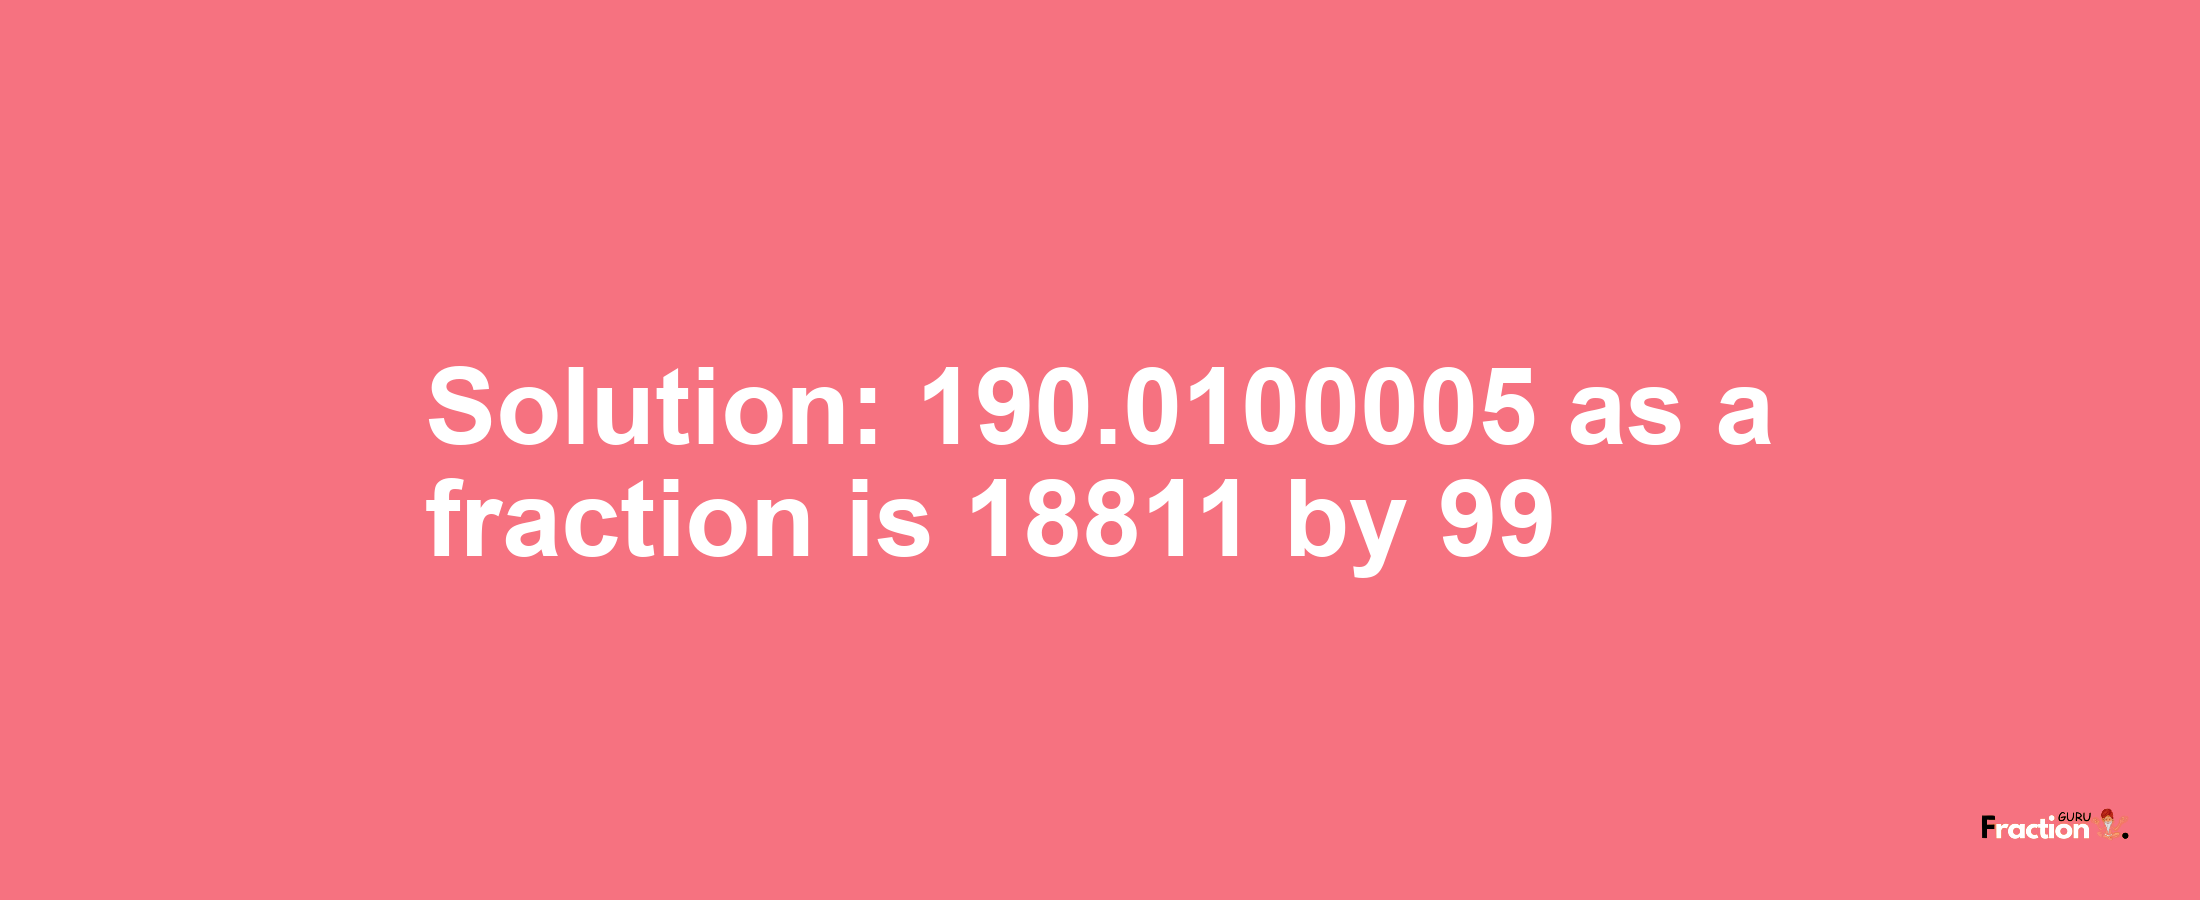 Solution:190.0100005 as a fraction is 18811/99